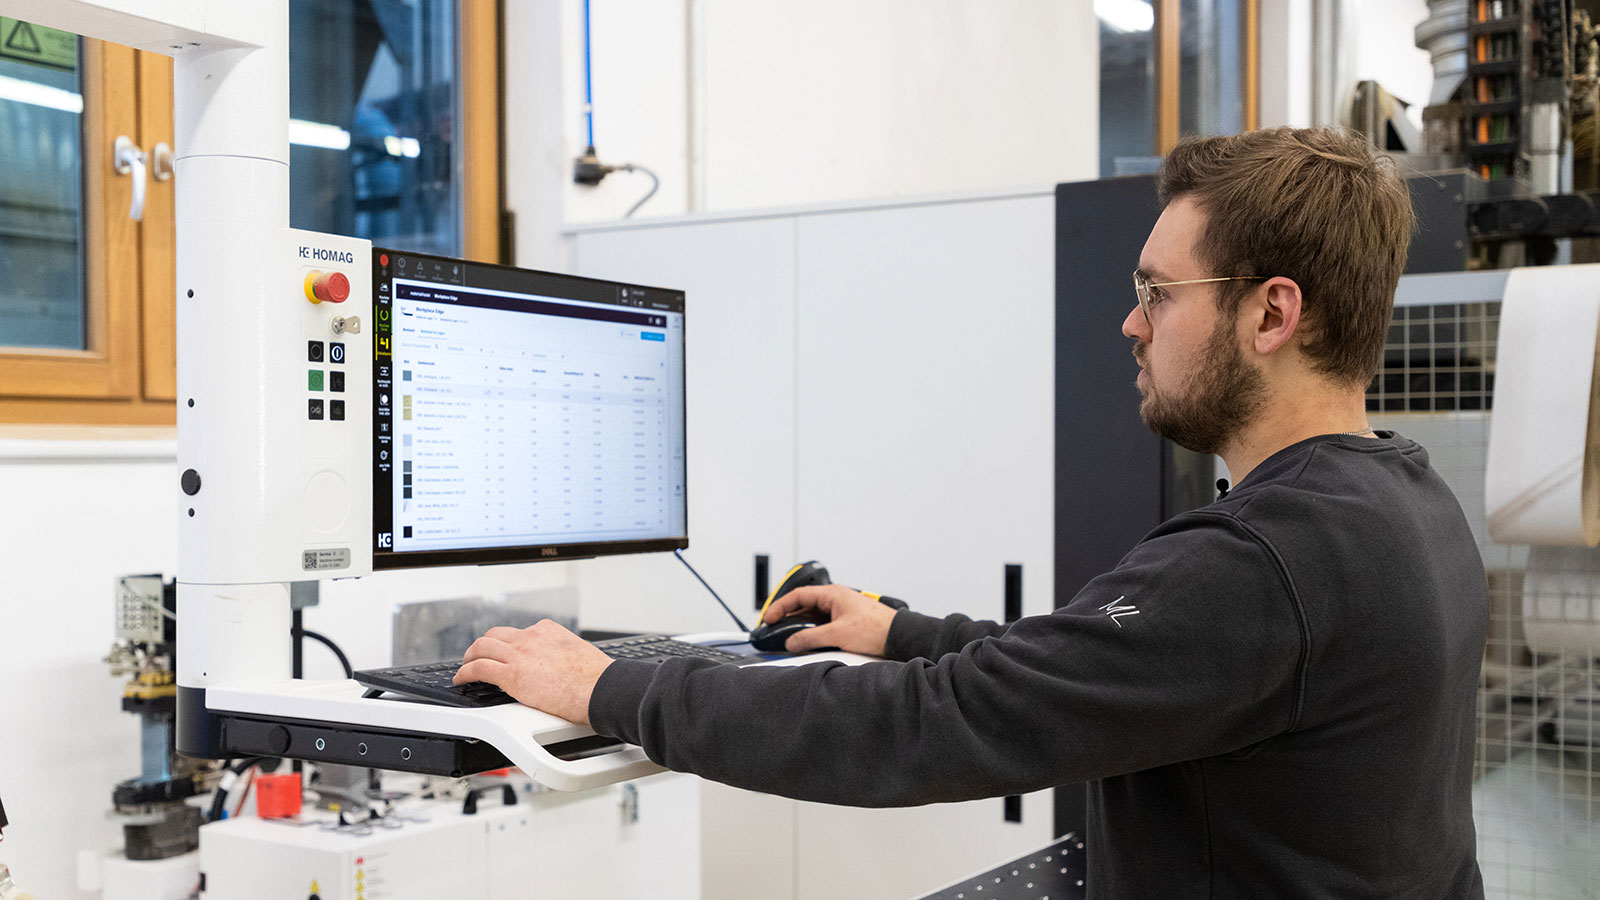 Martin Lechner at the EDGETEQ S-500: The Edge Data Package enables the entire team to access a catalog of all edgeband data from renowned edgeband suppliers directly at the machine.